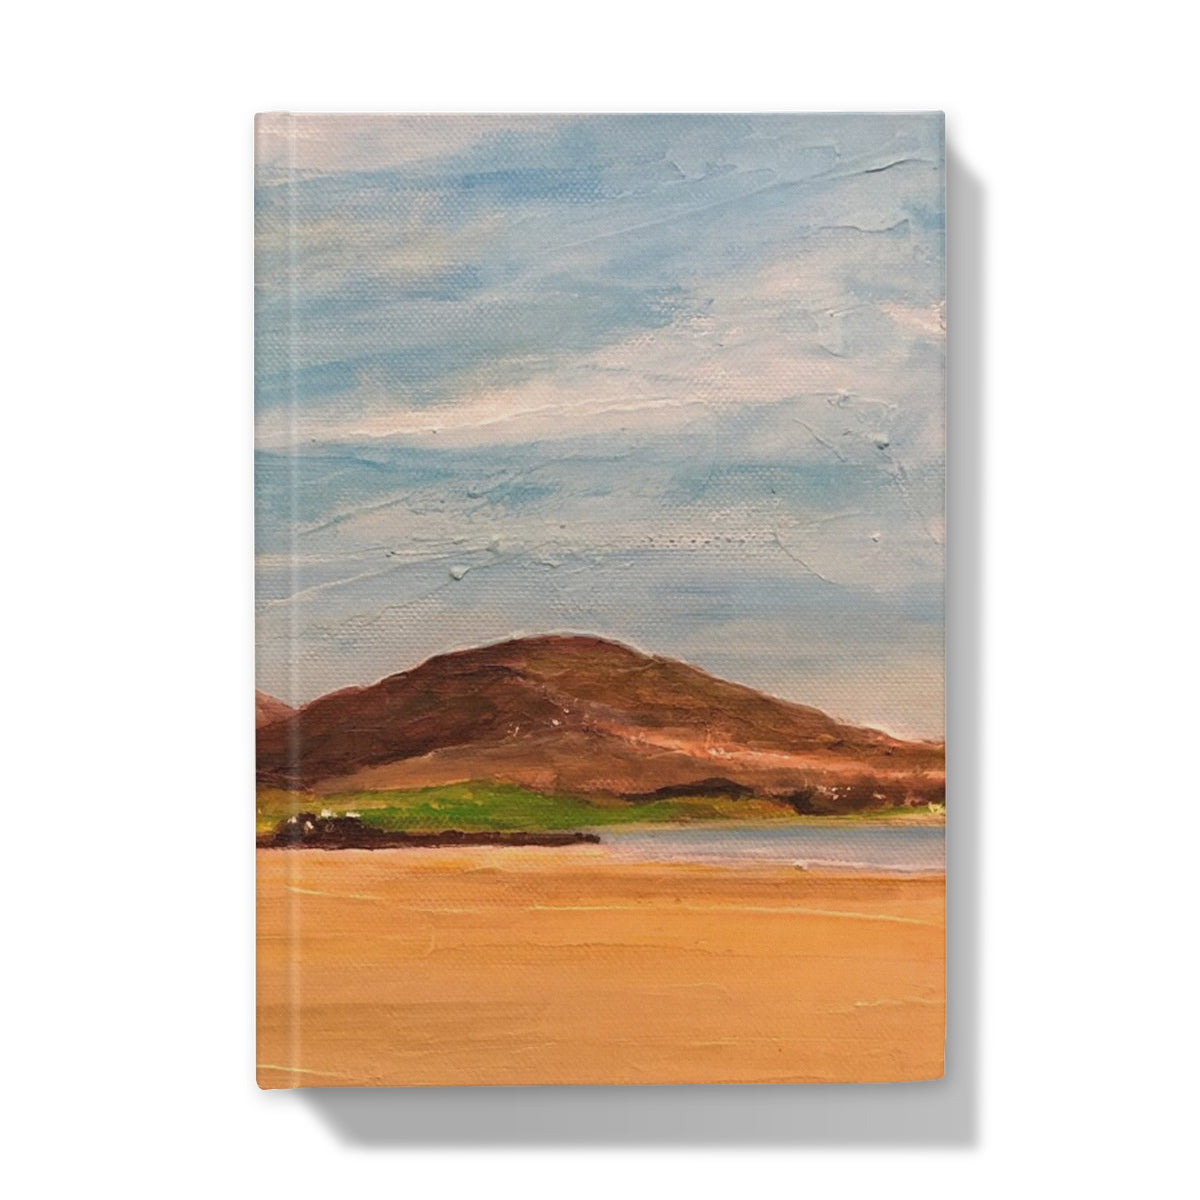 Uig Sands Lewis Art Gifts Hardback Journal-Journals & Notebooks-Hebridean Islands Art Gallery-A5-Lined-Paintings, Prints, Homeware, Art Gifts From Scotland By Scottish Artist Kevin Hunter